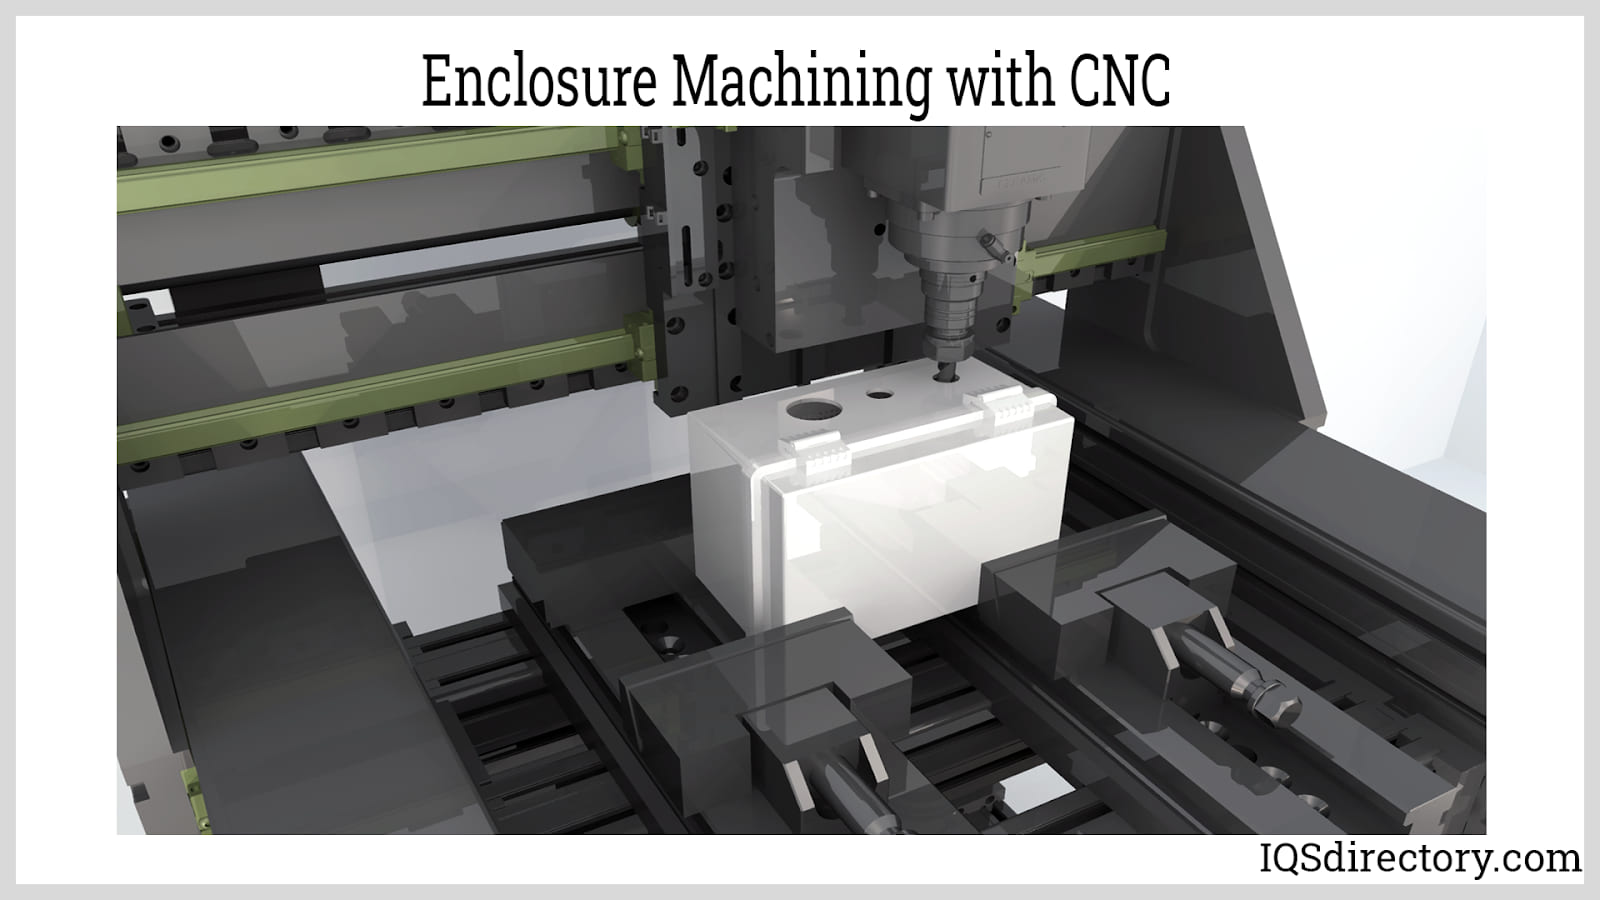  Enclosure Machining with CNC